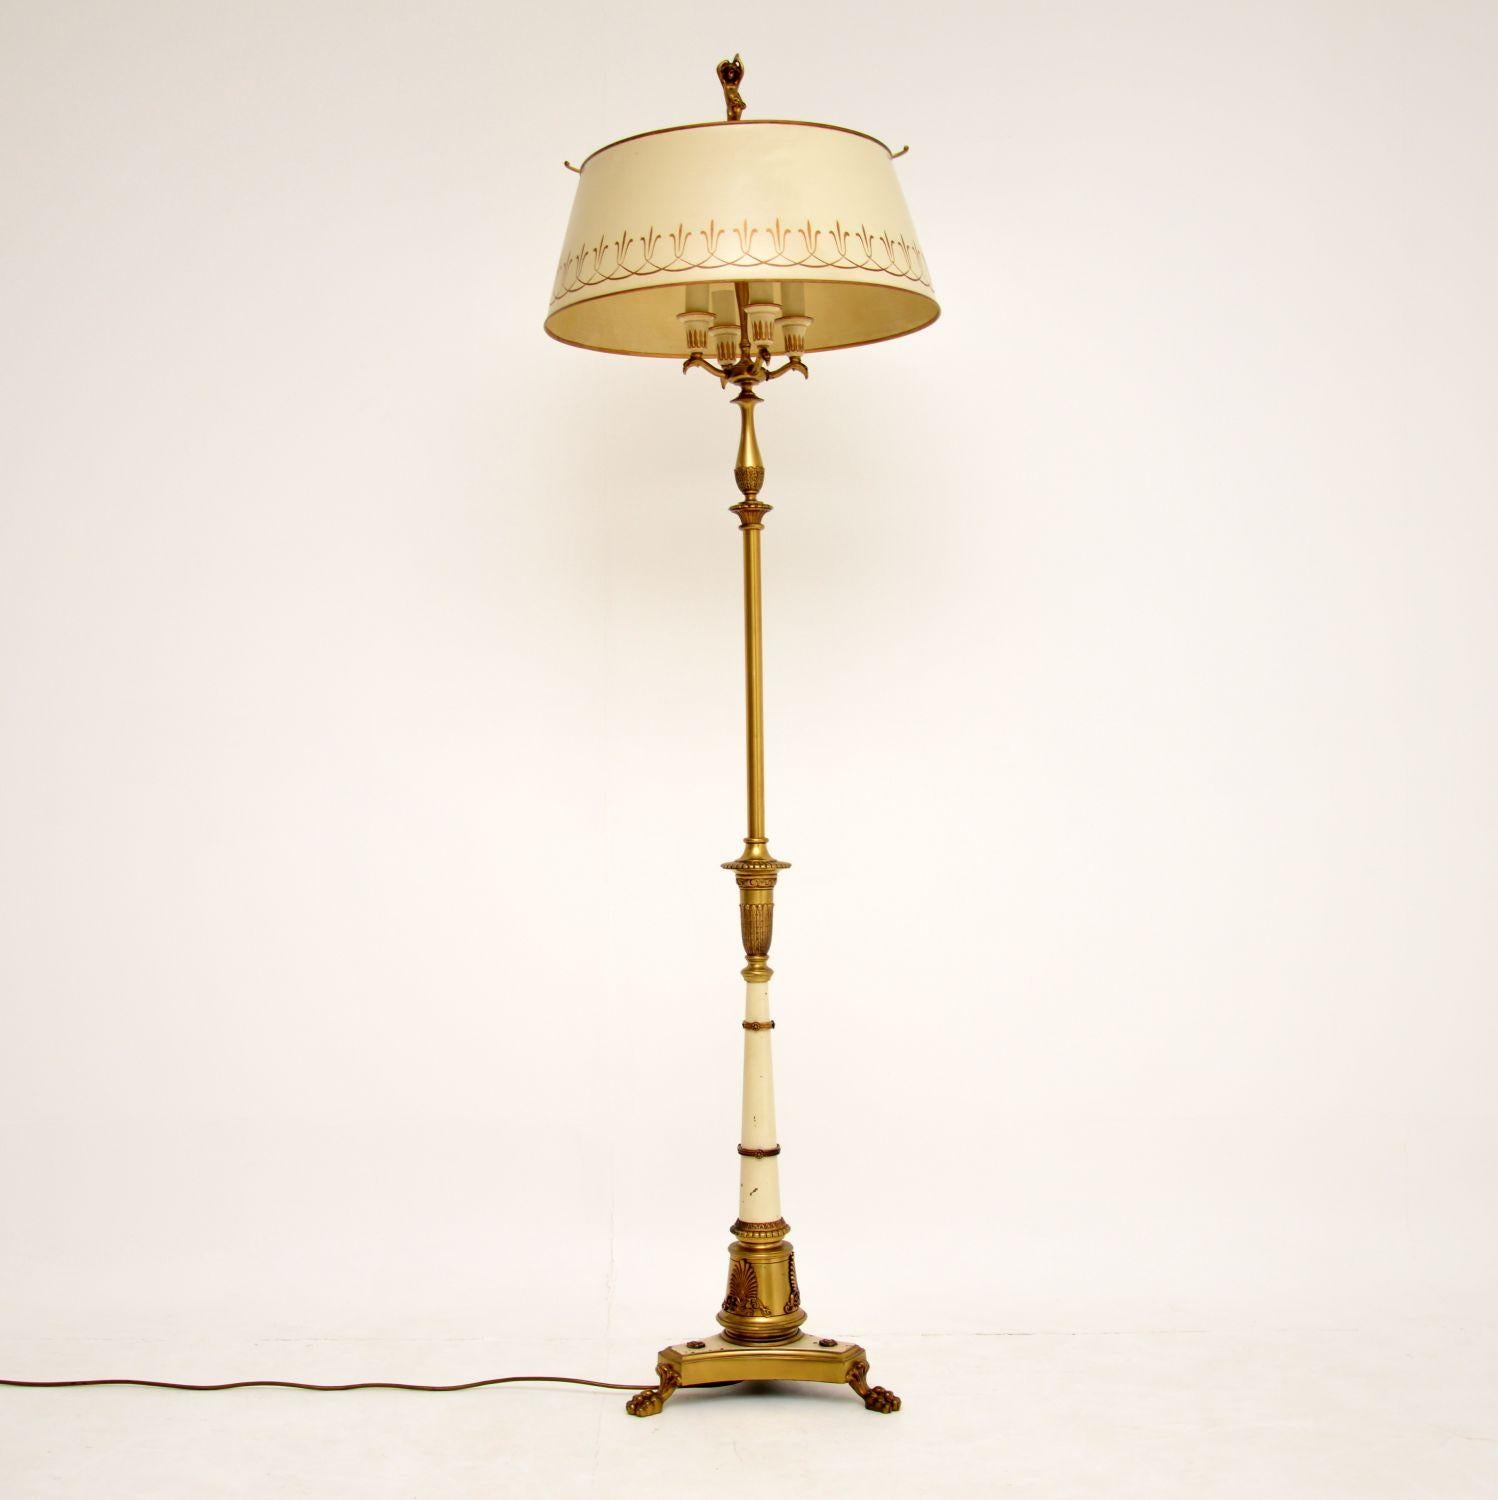 Antique French Neoclassical Tole floor lamp & original Tole shade in an ivory colour, dating from around the 1900-1920 period, all in good original condition with some natural age related marks on the base.

Please enlarge all the images to see all